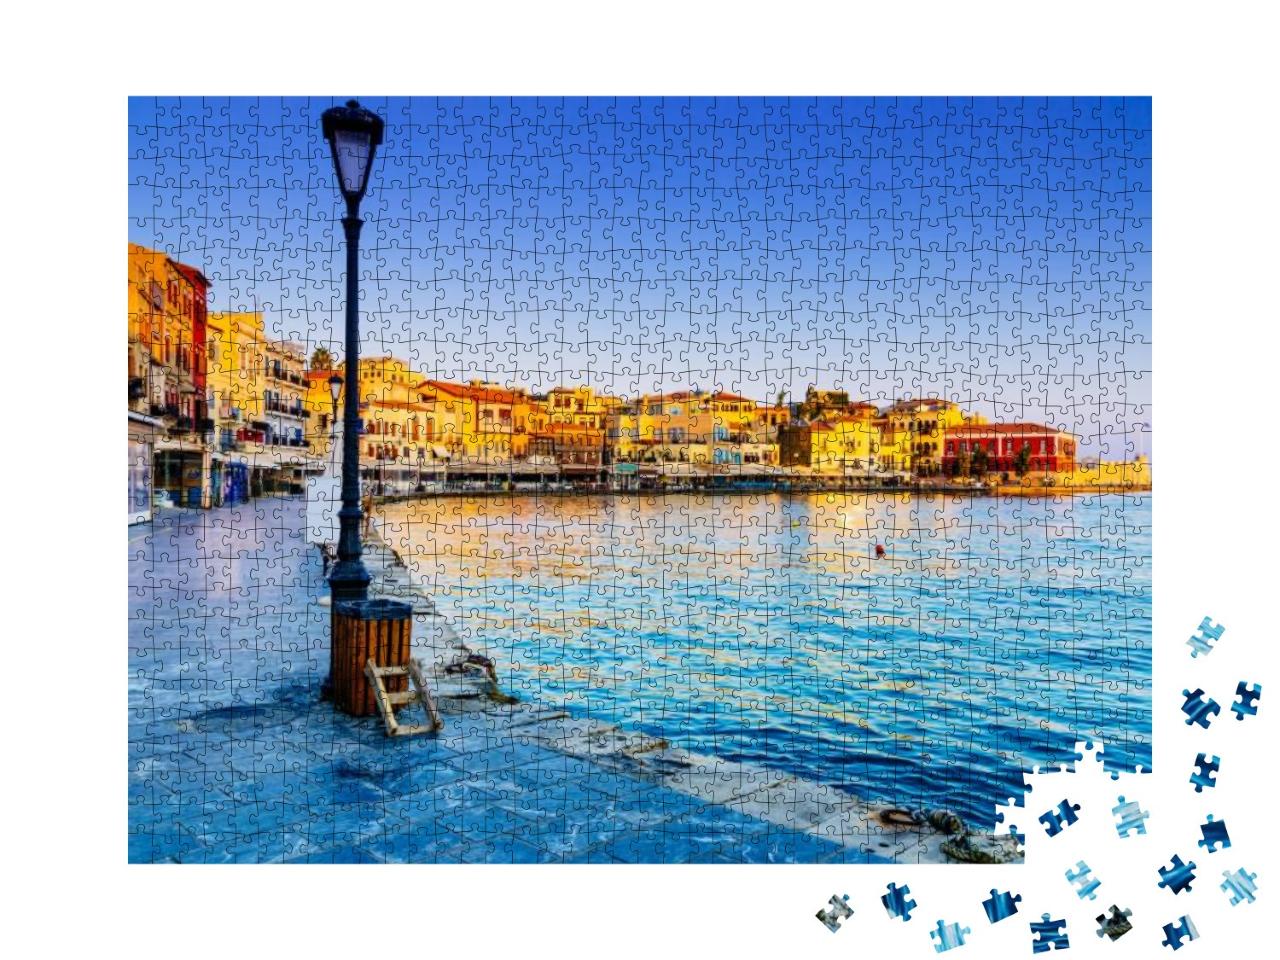 Chania Street in Harbor At Sunrise, Crete... Jigsaw Puzzle with 1000 pieces